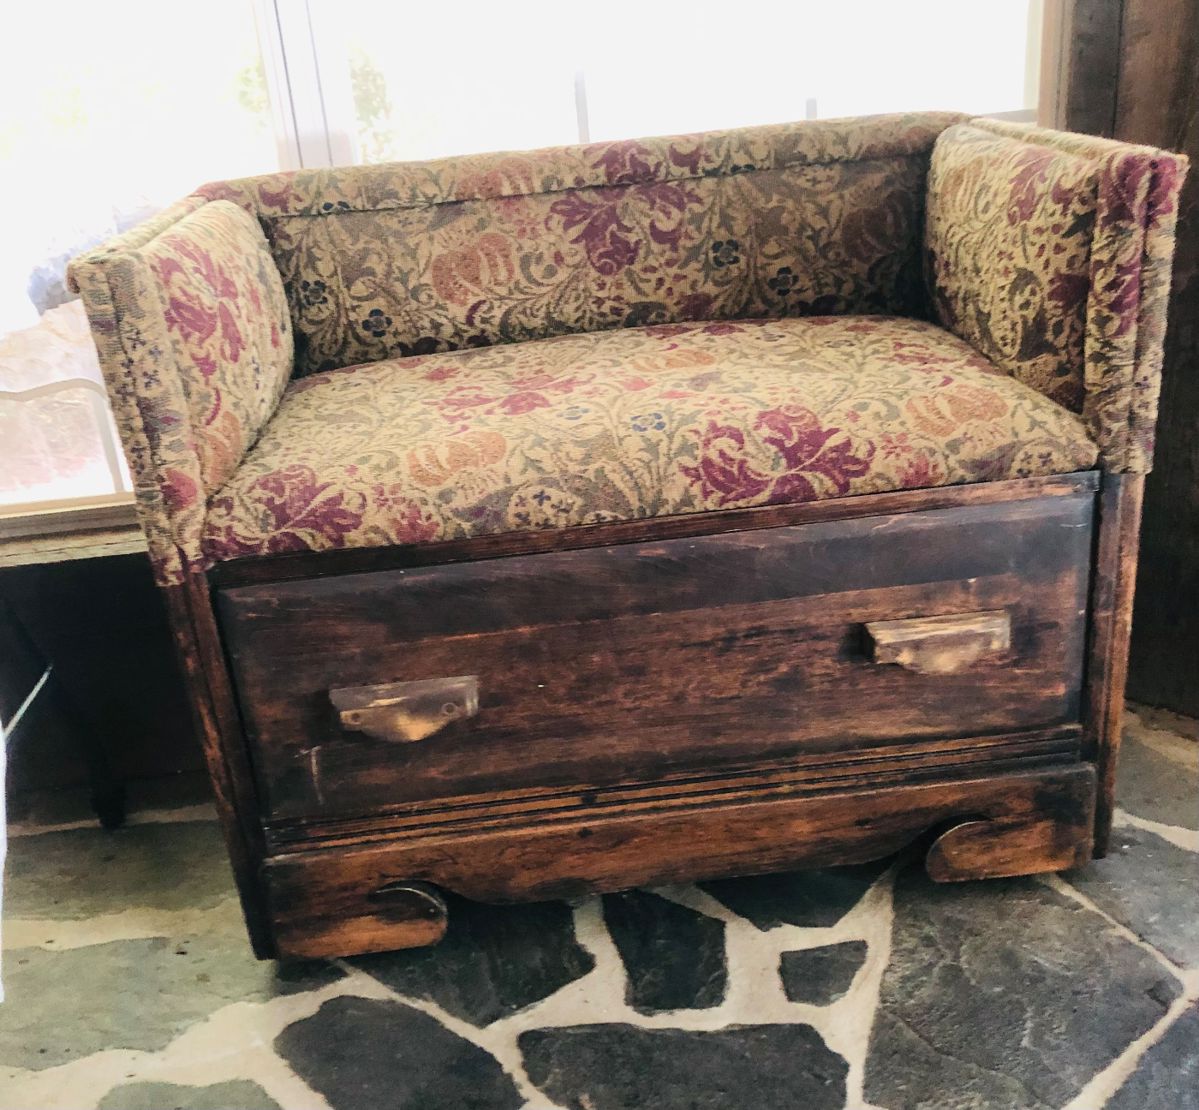 Vintage chair with storage drawer